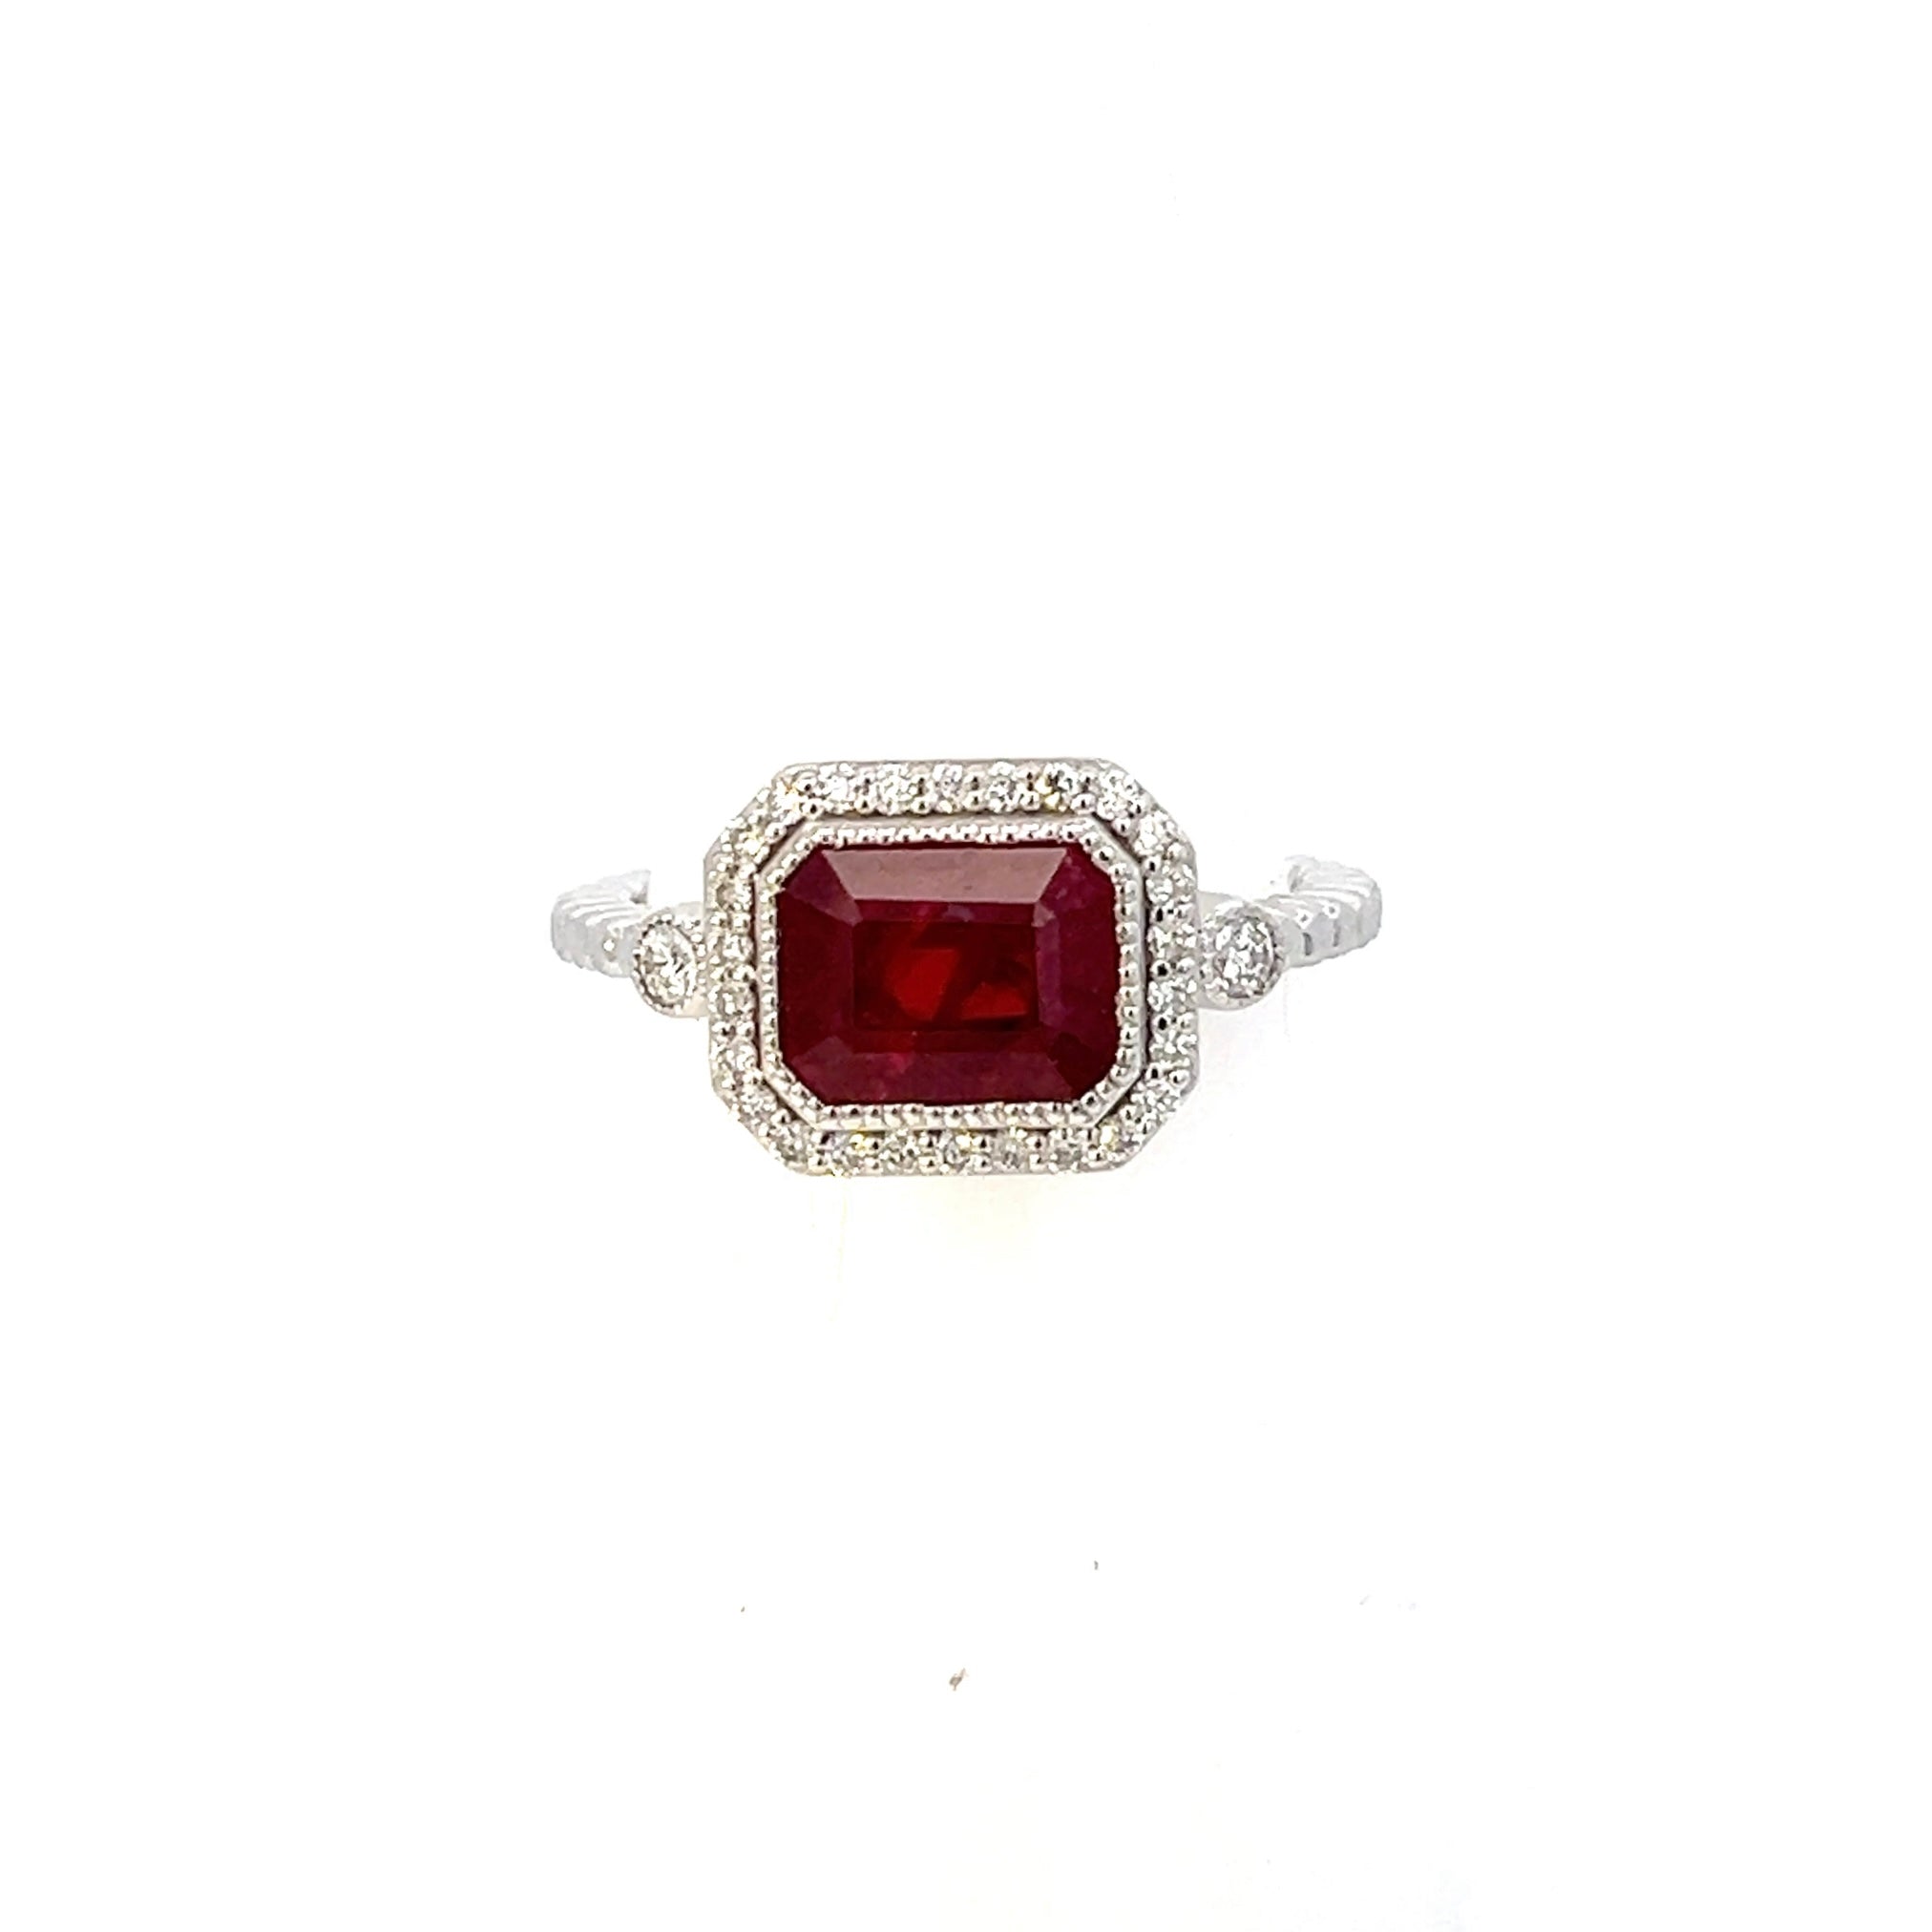 10.94ct Red Ruby, Diamond Three Stone Engagement Ring set in 18k White and  Yellow Gold, GIA Certified Afghanistan Unheated | Skyjems.ca